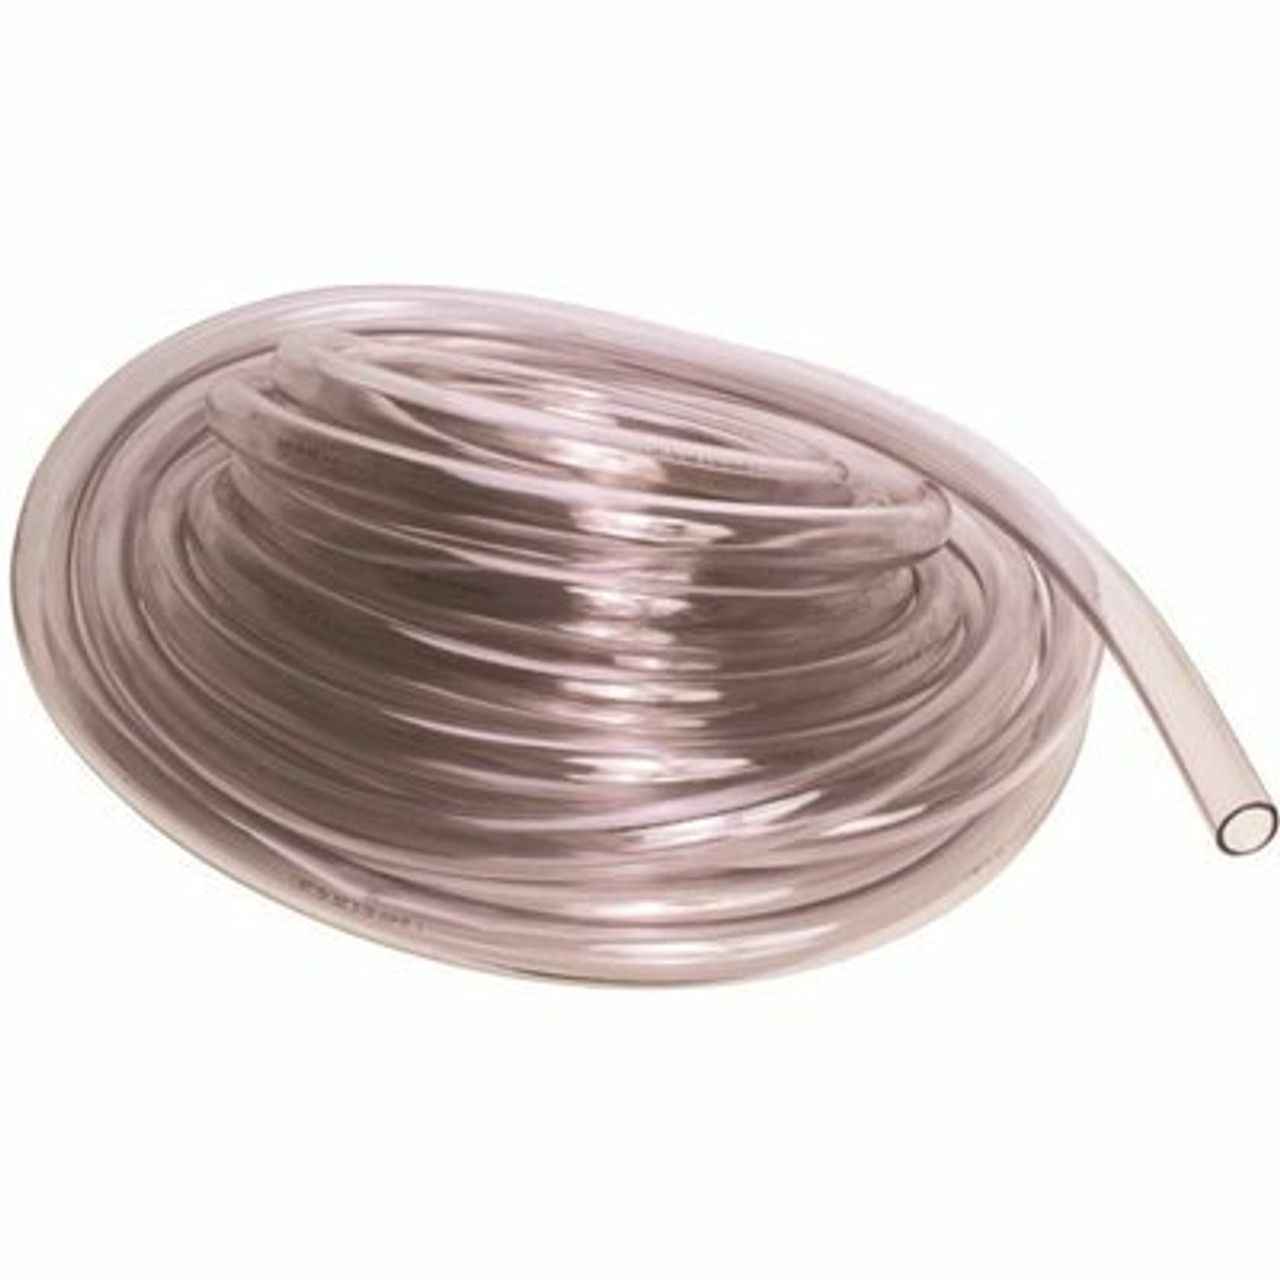 Sioux Chief 1/2 In. X 100 Ft. Clear Pvc Tubing Dwv